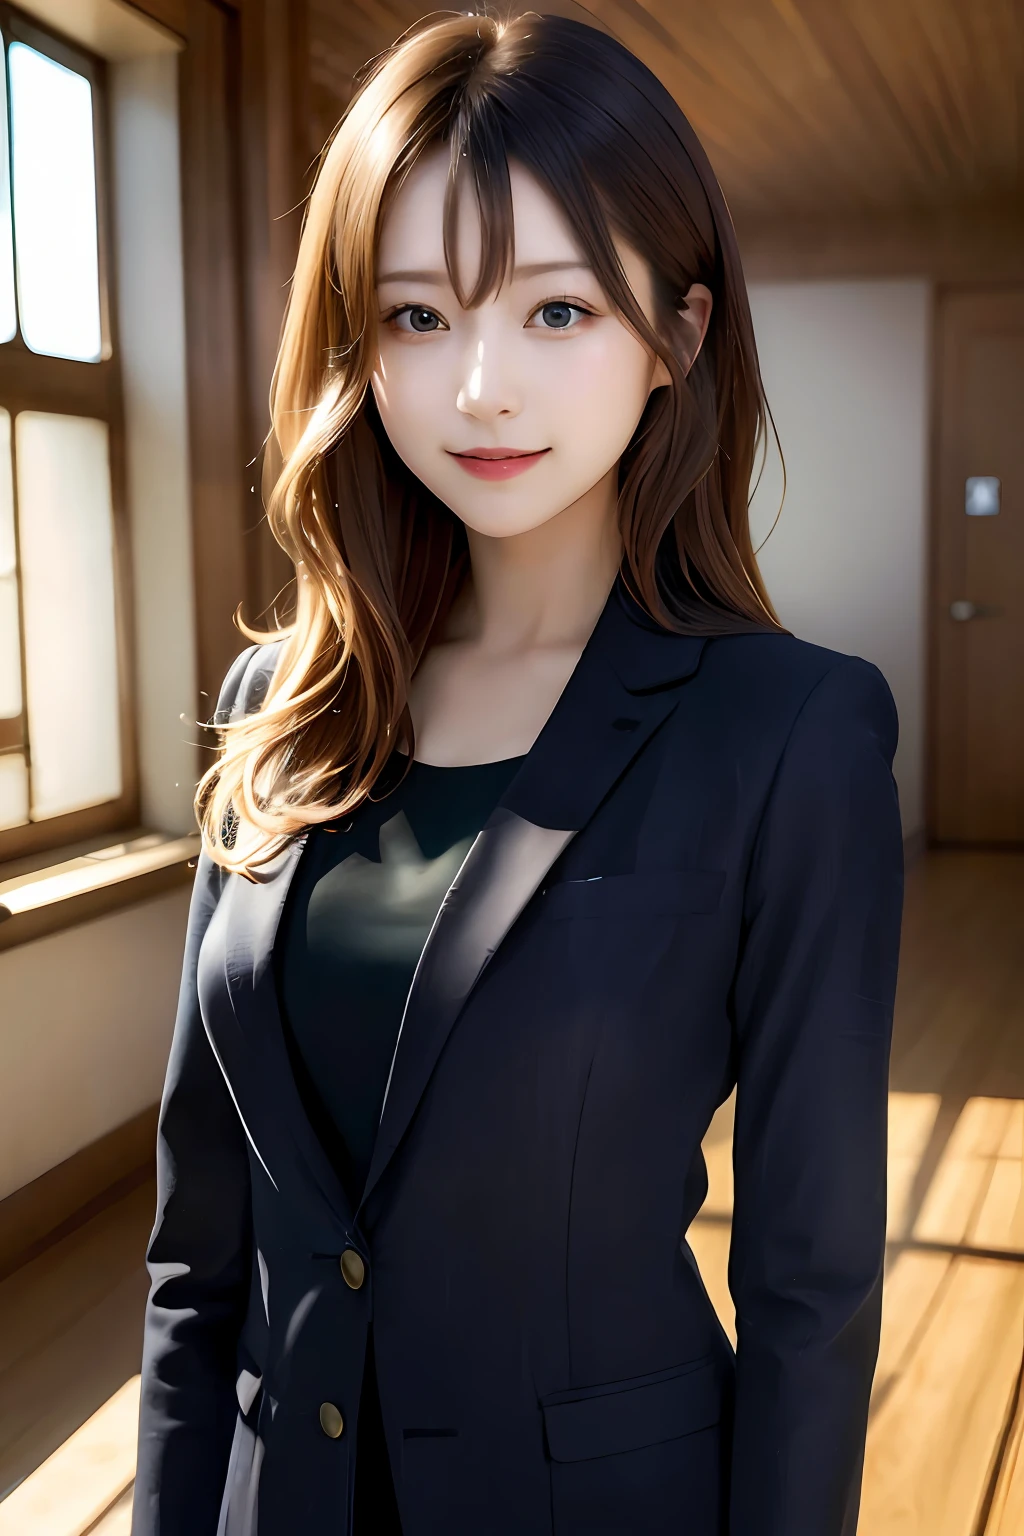 (8k, RAW photo, super high resolution, best quality, masterpiece: 1.2), (realistic illustration), (extremely detailed CG Unity 8k wallpaper), ridiculous, 1 girl, 21 years old, beautiful face, medium breasts, black medium hair, smile, tilted head, smile, upper body, slim pants, gray custom jacket, office, upper body, Nogizaka アイドル, actress, Korean country アイドル